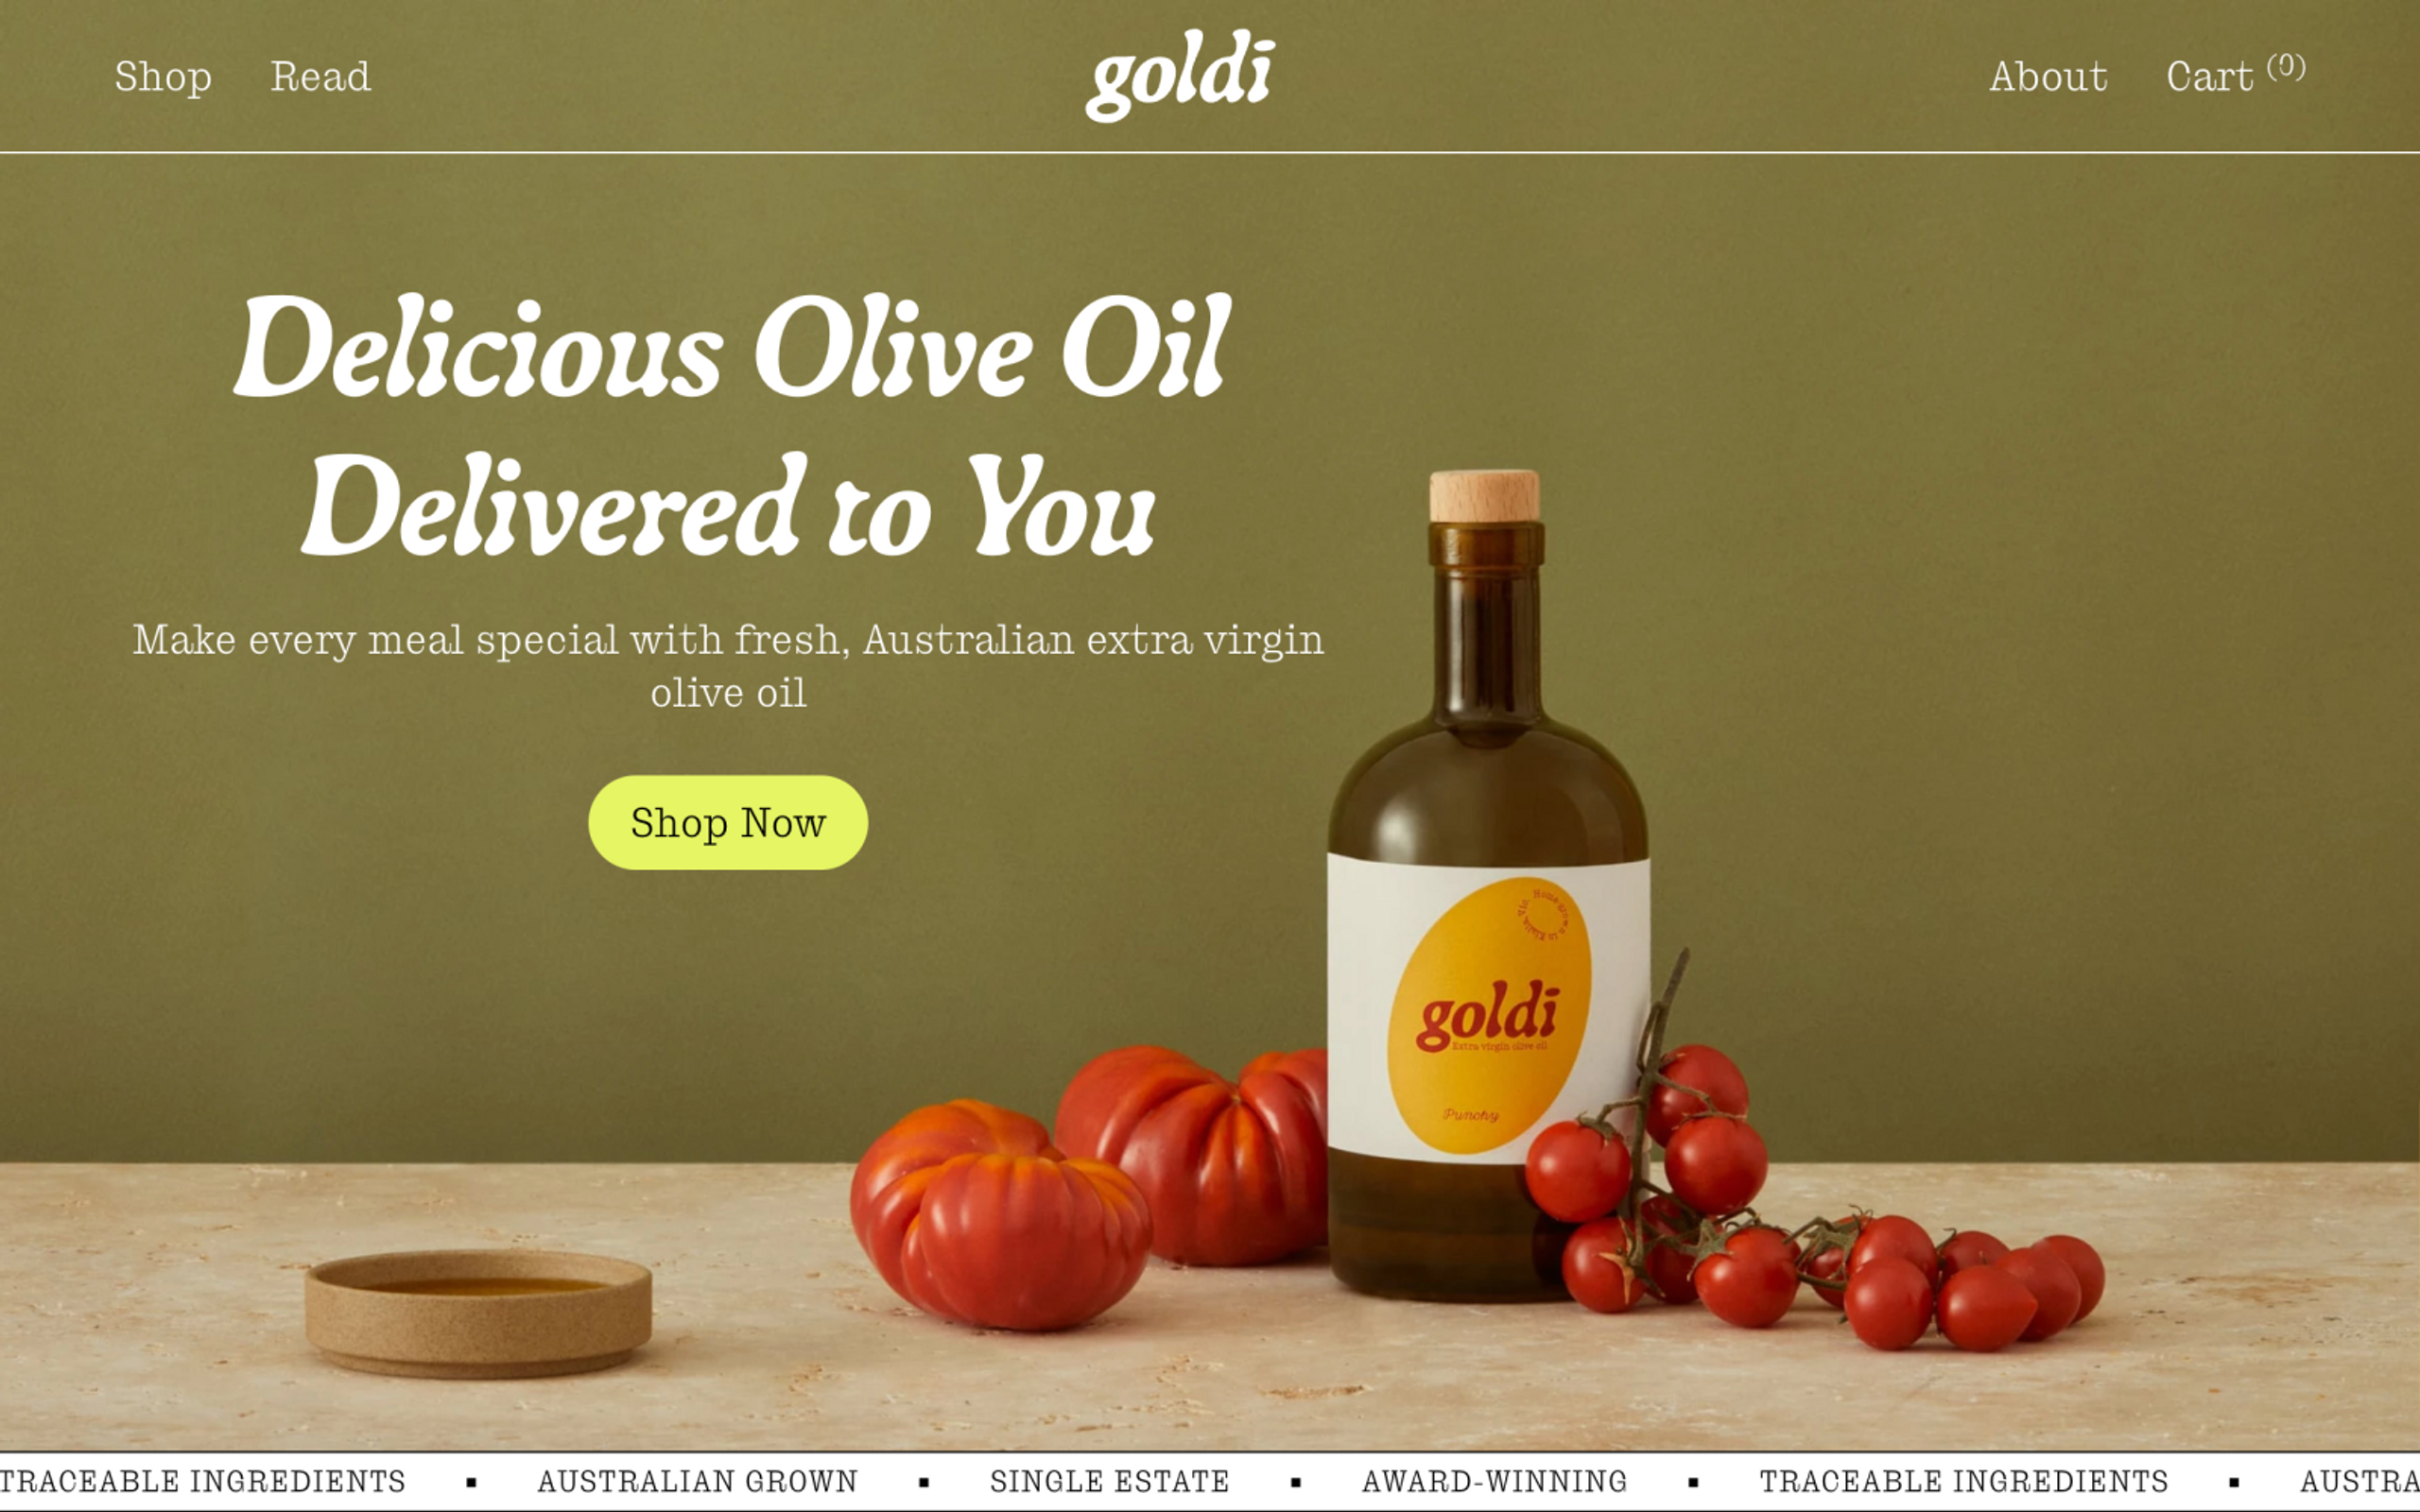 Goldi Home Page